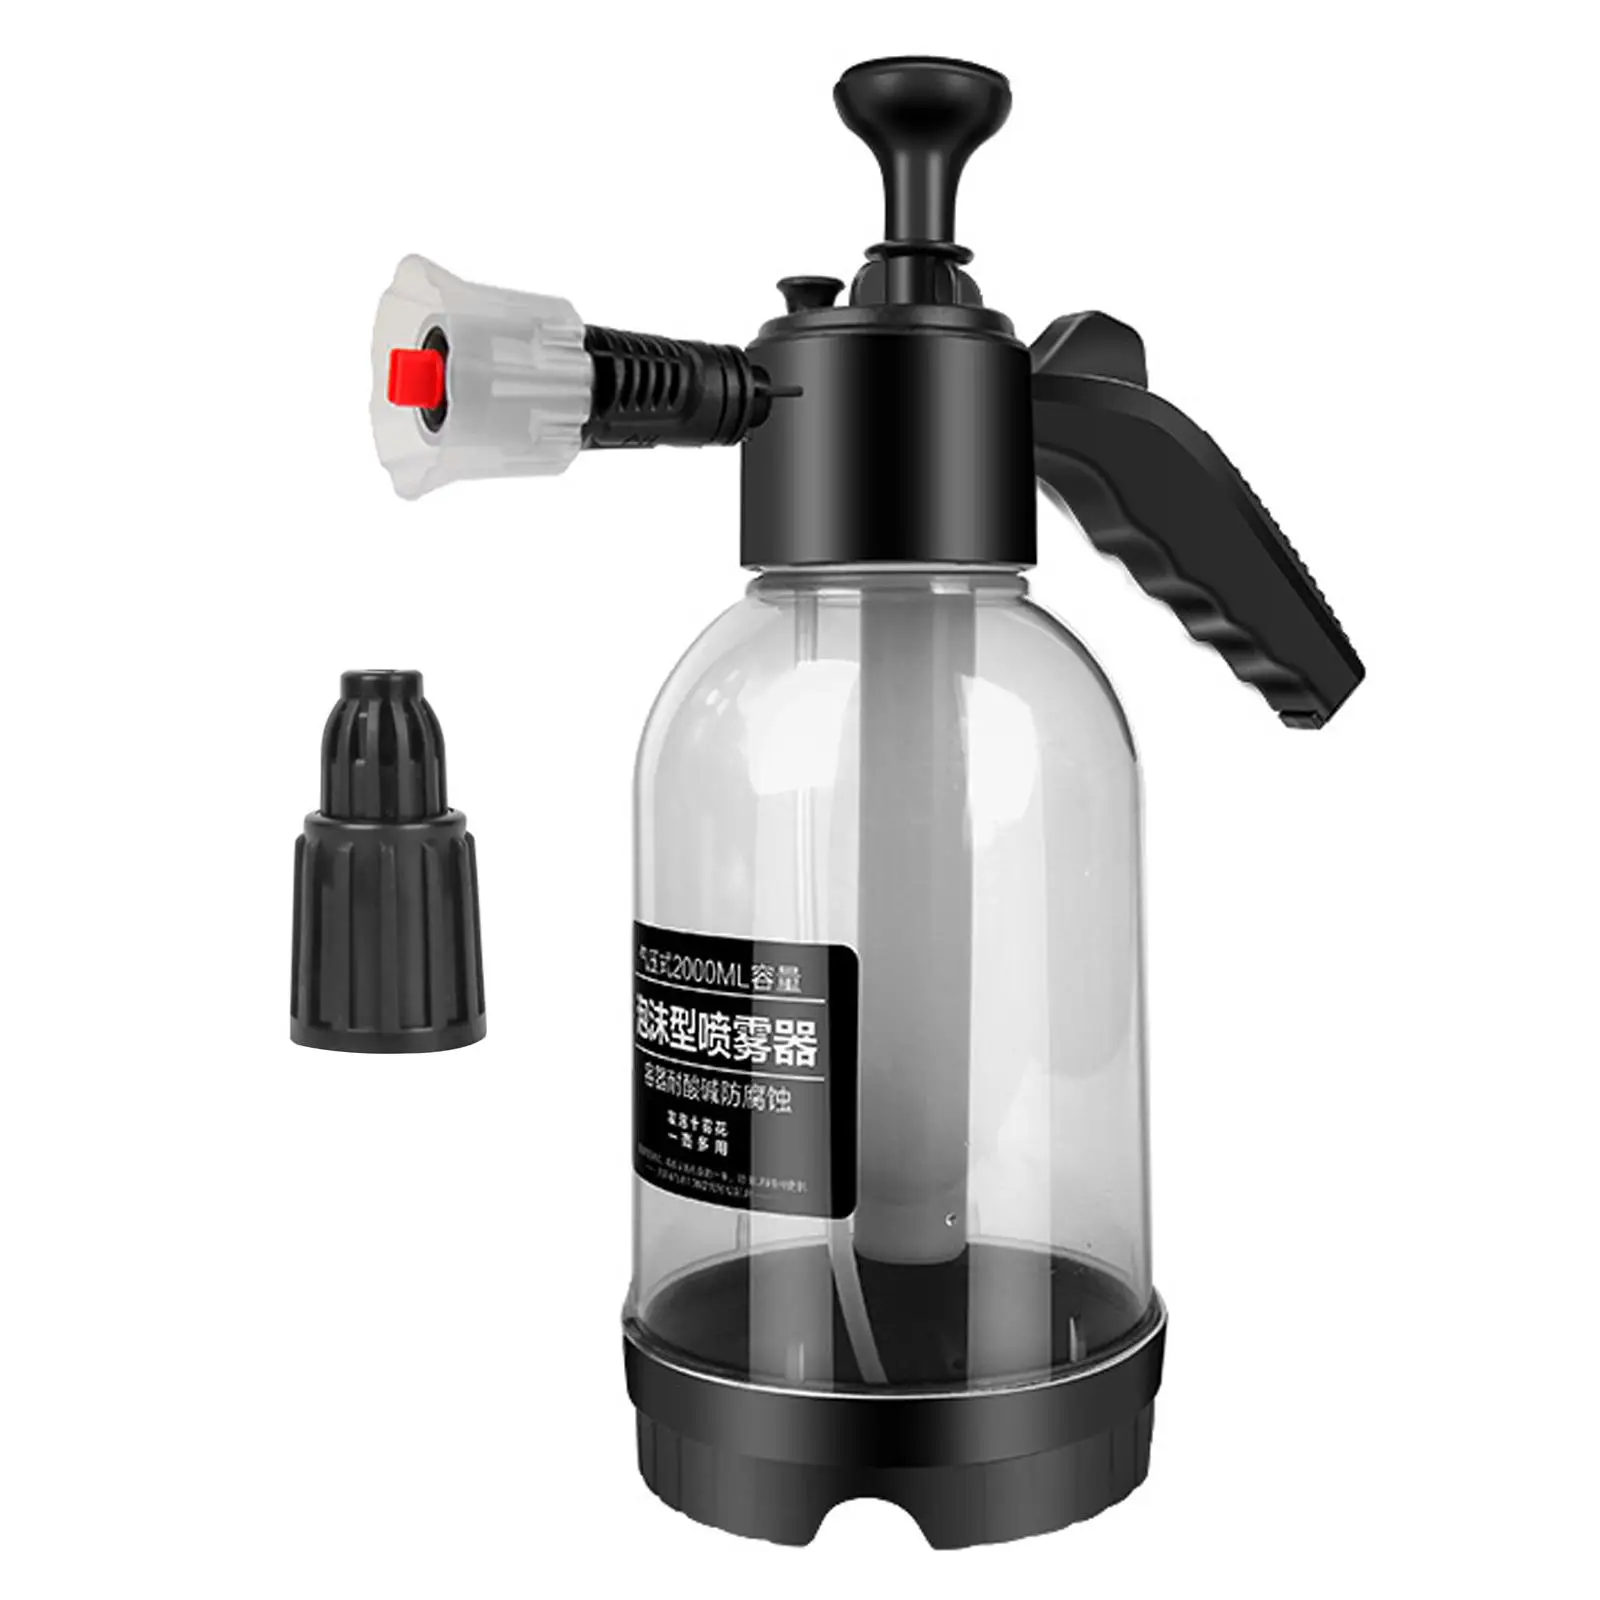 car wash Foam Sprayer 2L Multifunction Watering can Cleaning Equipment for Outdoor Garden Automotive Detailing Home